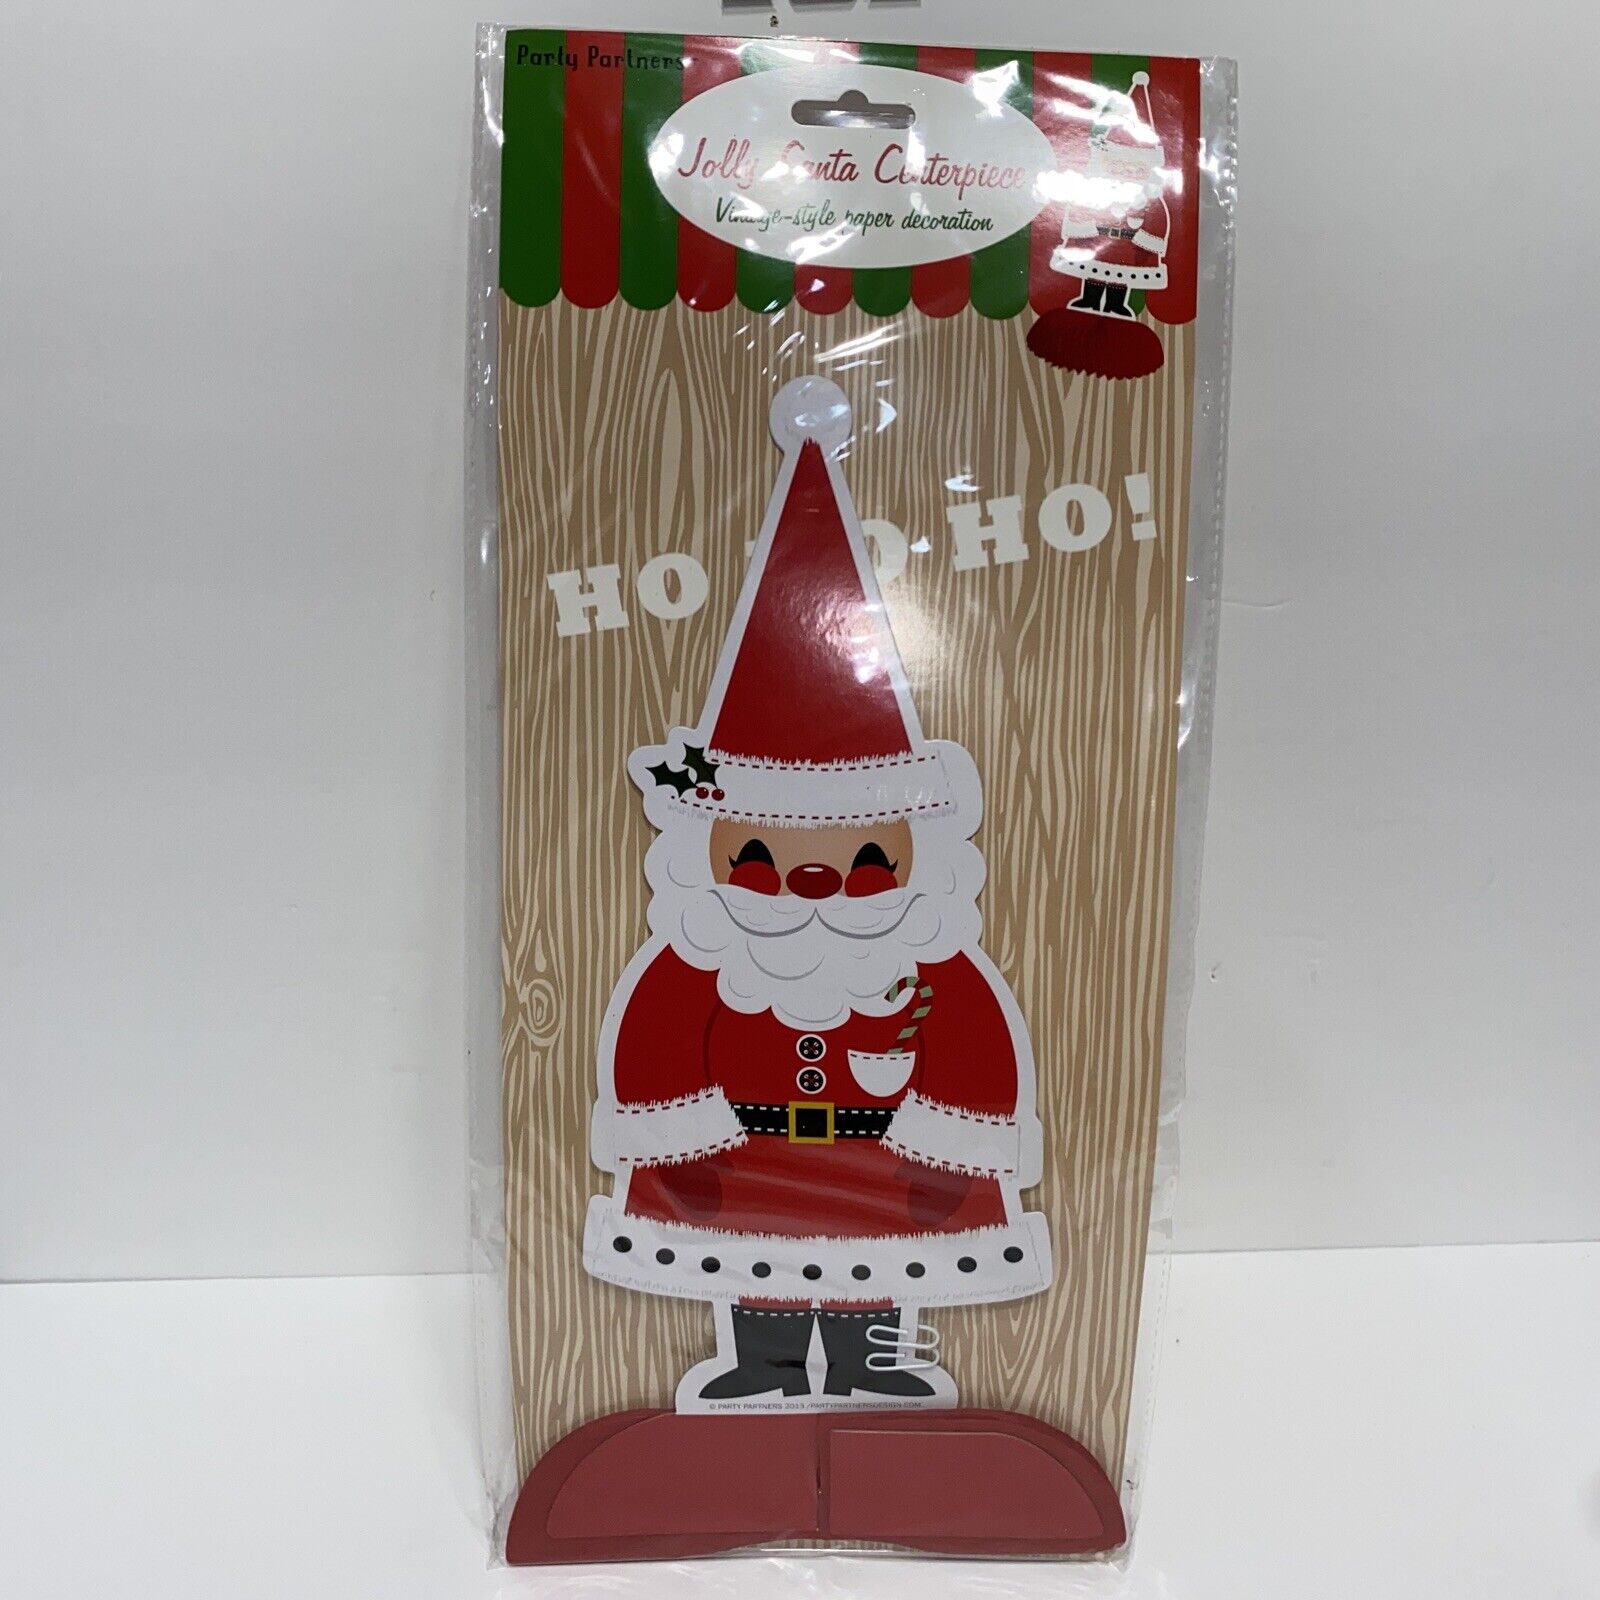 Santa Claus, Center piece NEW Party Planners Jolly , 2013 lot of 5 FAST SHIPPING